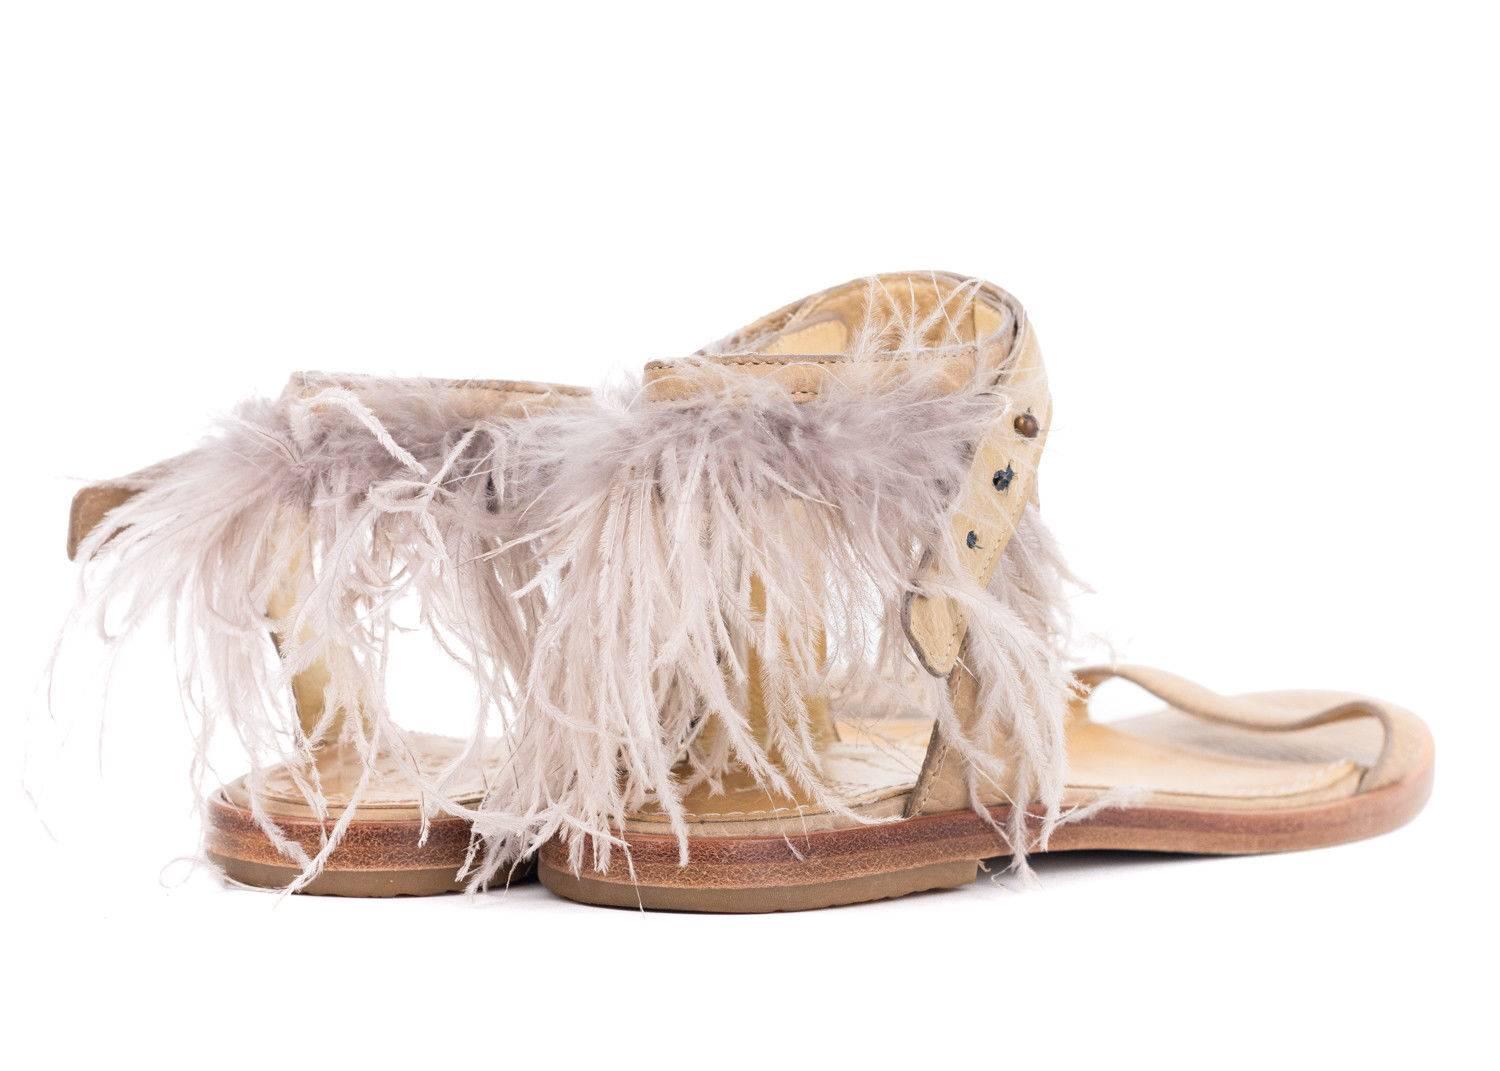 Enjoy your wild side in your Brunello Cucinelli Sandals. This light brown sandal features a grained leather, light grey feather infused ankle strap, and wooden sole. Start your day by pairing this beauty with an tonal shift dress for feminine